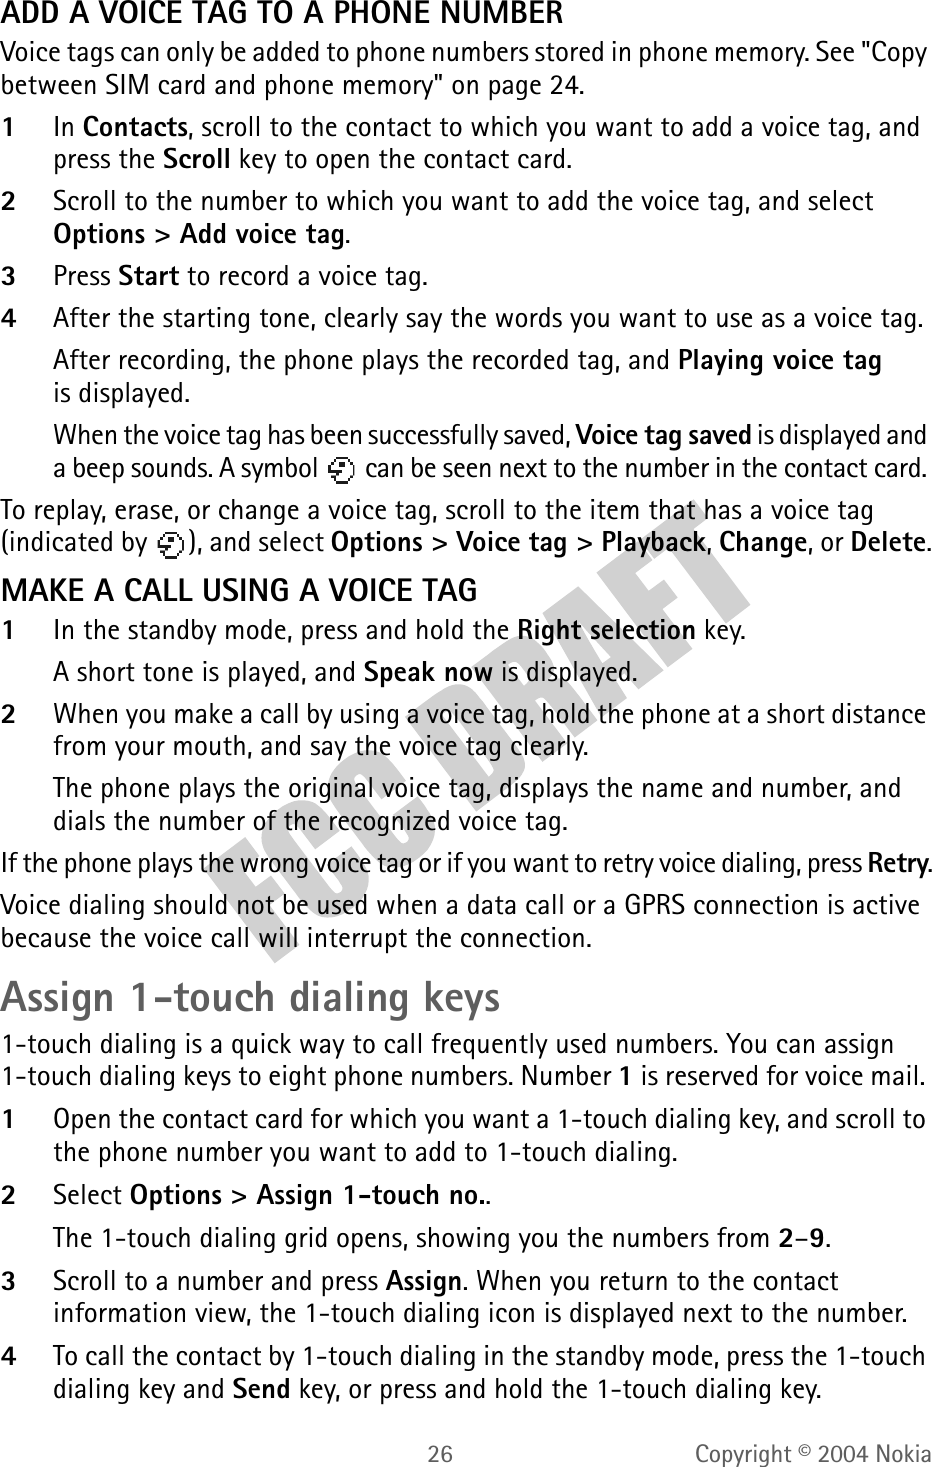 26 Copyright © 2004 NokiaADD A VOICE TAG TO A PHONE NUMBERVoice tags can only be added to phone numbers stored in phone memory. See &quot;Copy between SIM card and phone memory&quot; on page 24. 1In Contacts, scroll to the contact to which you want to add a voice tag, and press the Scroll key to open the contact card.2Scroll to the number to which you want to add the voice tag, and select Options &gt; Add voice tag.3Press Start to record a voice tag. 4After the starting tone, clearly say the words you want to use as a voice tag.After recording, the phone plays the recorded tag, and Playing voice tag is displayed.When the voice tag has been successfully saved, Voice tag saved is displayed and a beep sounds. A symbol   can be seen next to the number in the contact card. To replay, erase, or change a voice tag, scroll to the item that has a voice tag (indicated by  ), and select Options &gt; Voice tag &gt; Playback, Change, or Delete.MAKE A CALL USING A VOICE TAG1In the standby mode, press and hold the Right selection key. A short tone is played, and Speak now is displayed.2When you make a call by using a voice tag, hold the phone at a short distance from your mouth, and say the voice tag clearly.The phone plays the original voice tag, displays the name and number, and dials the number of the recognized voice tag.If the phone plays the wrong voice tag or if you want to retry voice dialing, press Retry.Voice dialing should not be used when a data call or a GPRS connection is active because the voice call will interrupt the connection.Assign 1-touch dialing keys1-touch dialing is a quick way to call frequently used numbers. You can assign 1-touch dialing keys to eight phone numbers. Number 1 is reserved for voice mail. 1Open the contact card for which you want a 1-touch dialing key, and scroll to the phone number you want to add to 1-touch dialing.2Select Options &gt; Assign 1-touch no..The 1-touch dialing grid opens, showing you the numbers from 2–9.3Scroll to a number and press Assign. When you return to the contact information view, the 1-touch dialing icon is displayed next to the number.4To call the contact by 1-touch dialing in the standby mode, press the 1-touch dialing key and Send key, or press and hold the 1-touch dialing key.